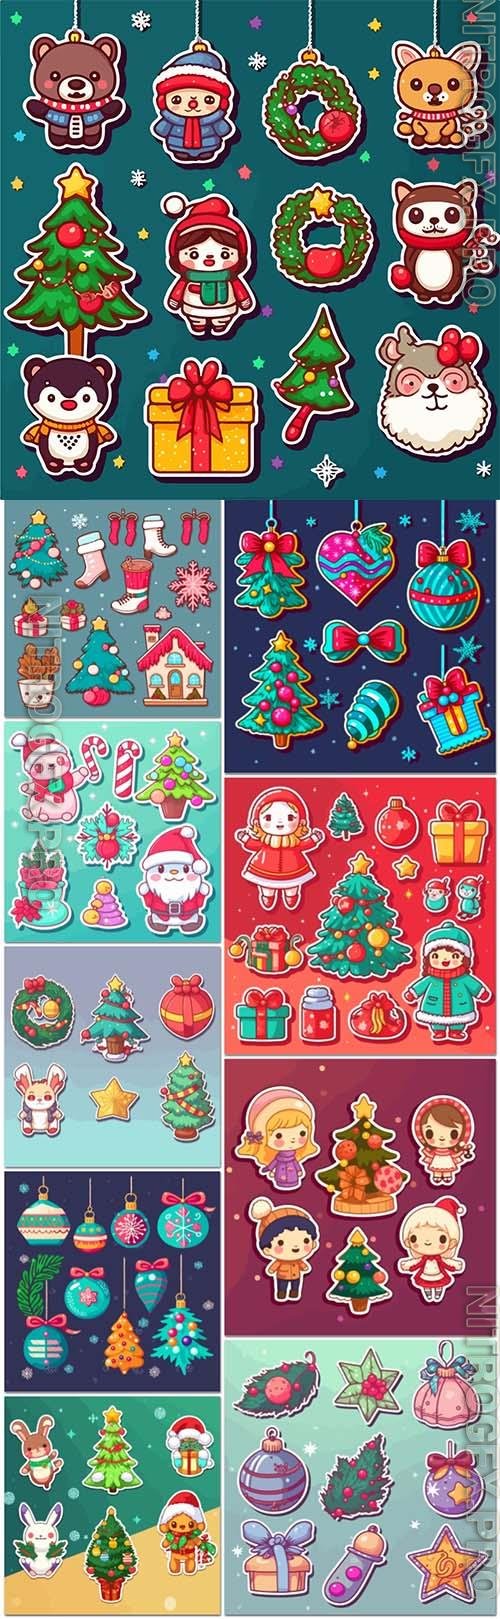 Sticker set xmas, attribute ornament, sticker collection new year holidays